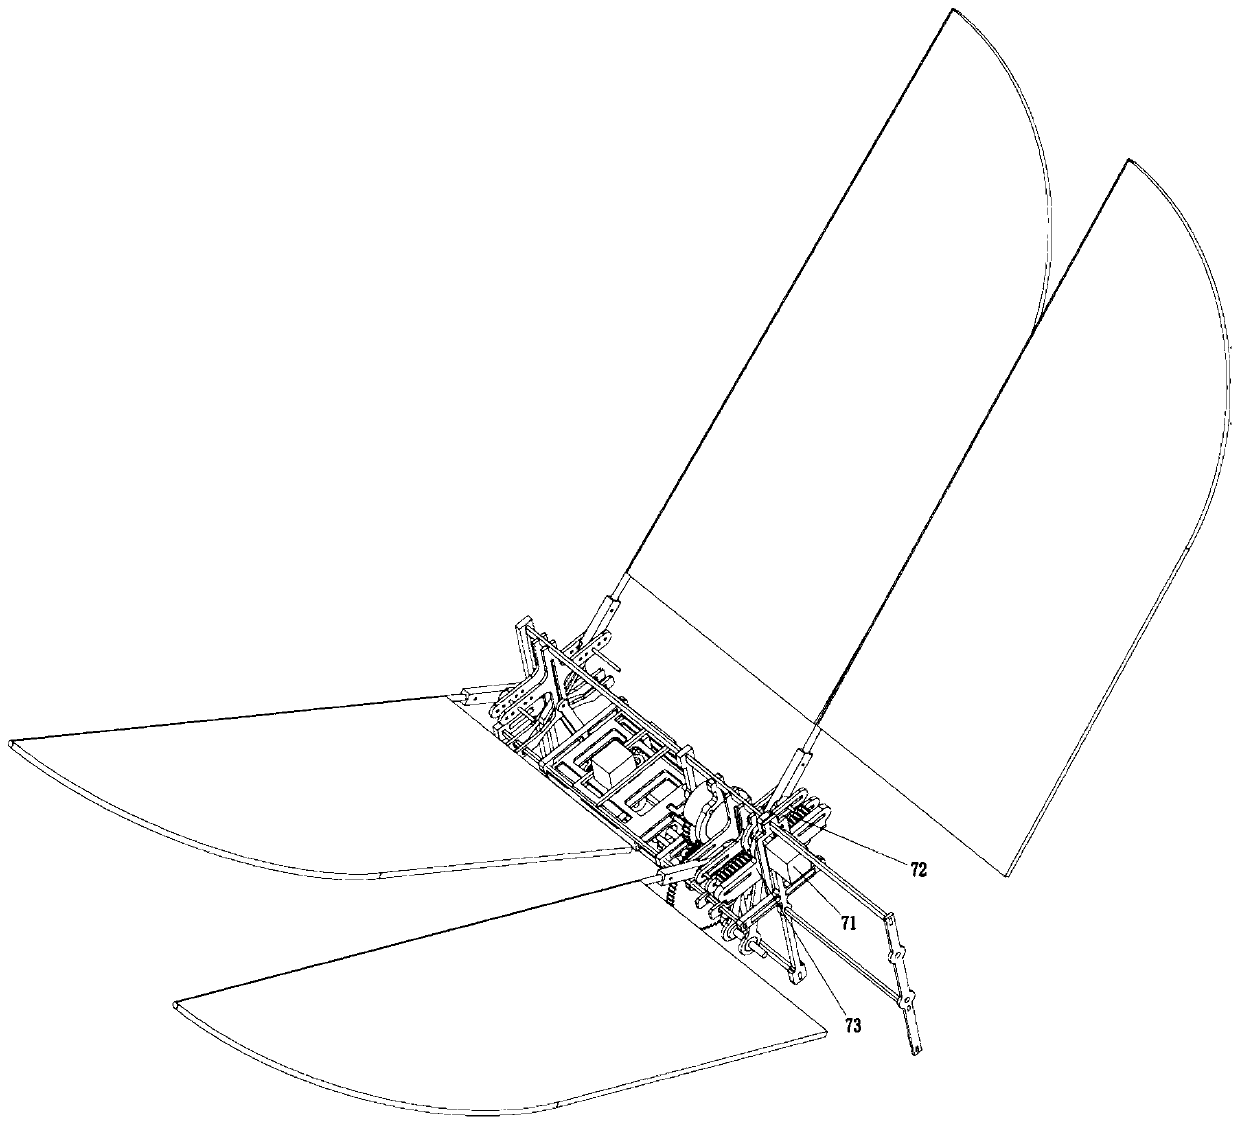 Phase changing flapping mechanism and dragonfly-imitated flapping wing aircraft